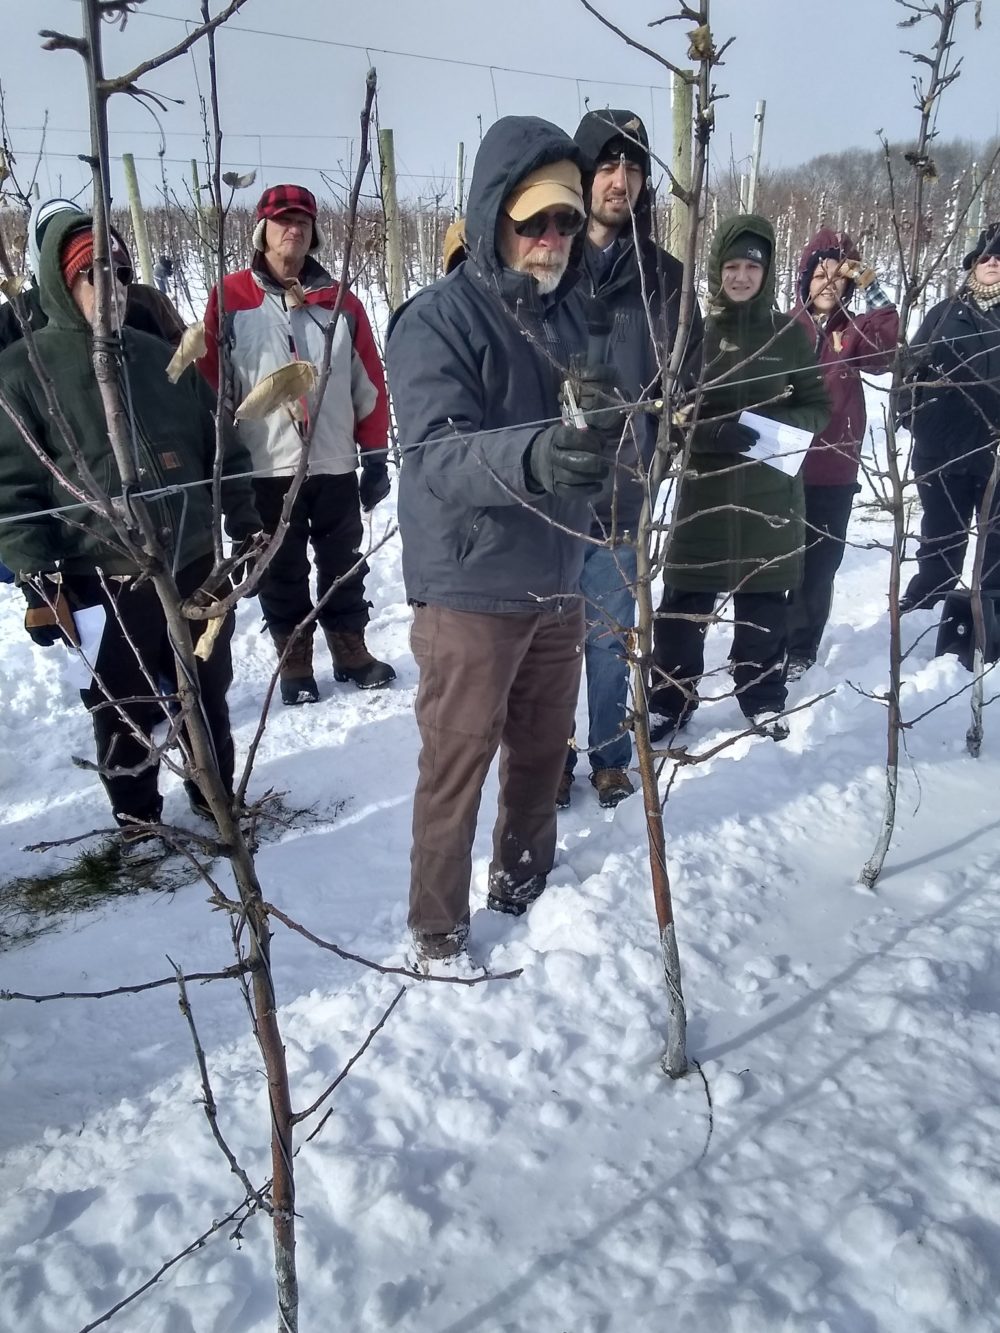 On the post-conference bus tour following IFTA in Grand Rapids, Dave Rennhack prunes Evercrisp planted in 2018 on G.41 and G.11 at his orchard in Hart, Michigan. (Matt Milkovich/Good Fruit Grower)